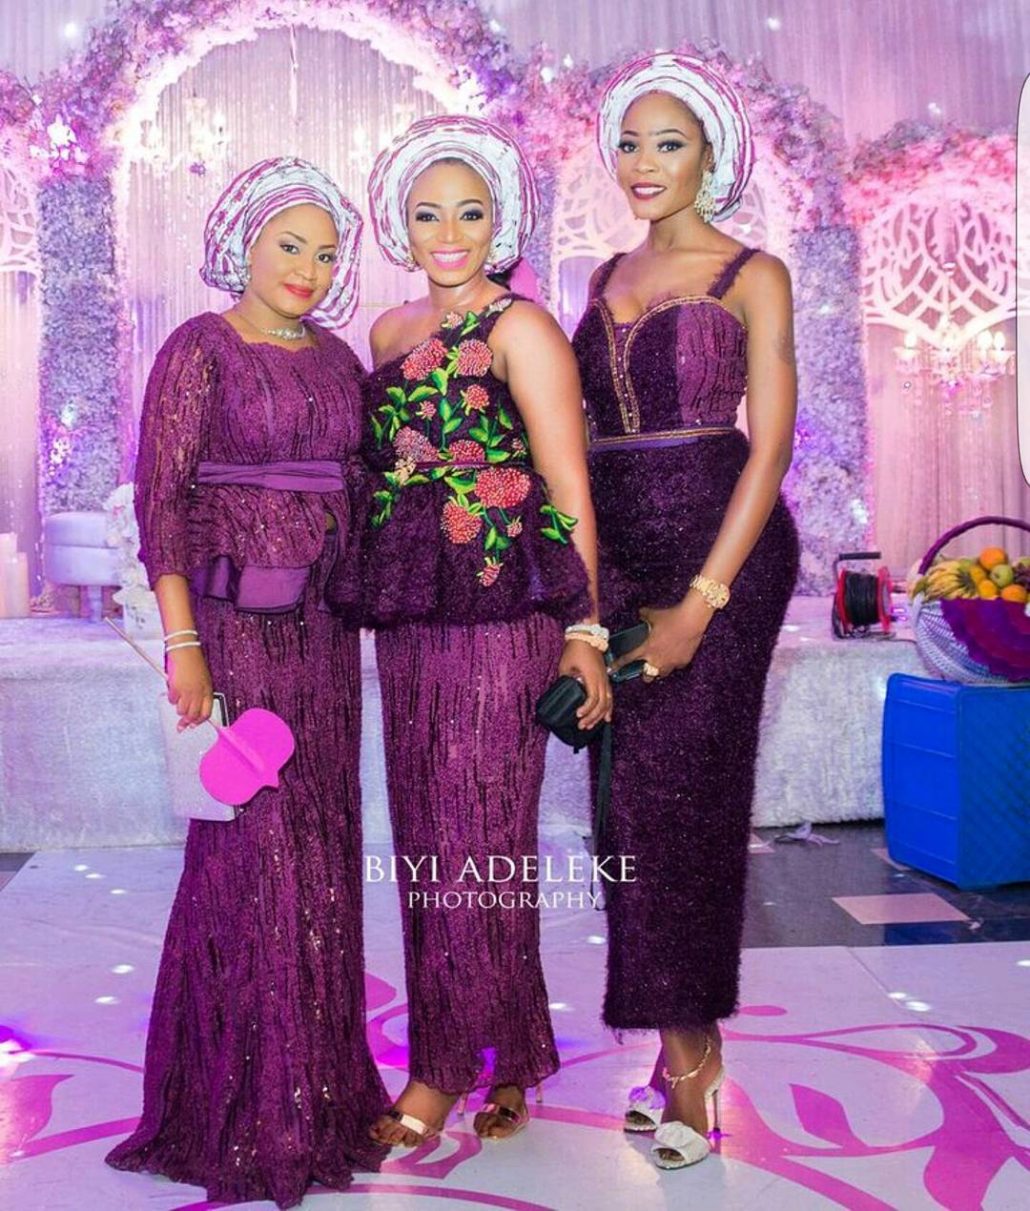 Turn Heads At You Next Owambe Party In These Fab Aso Ebi Styles.